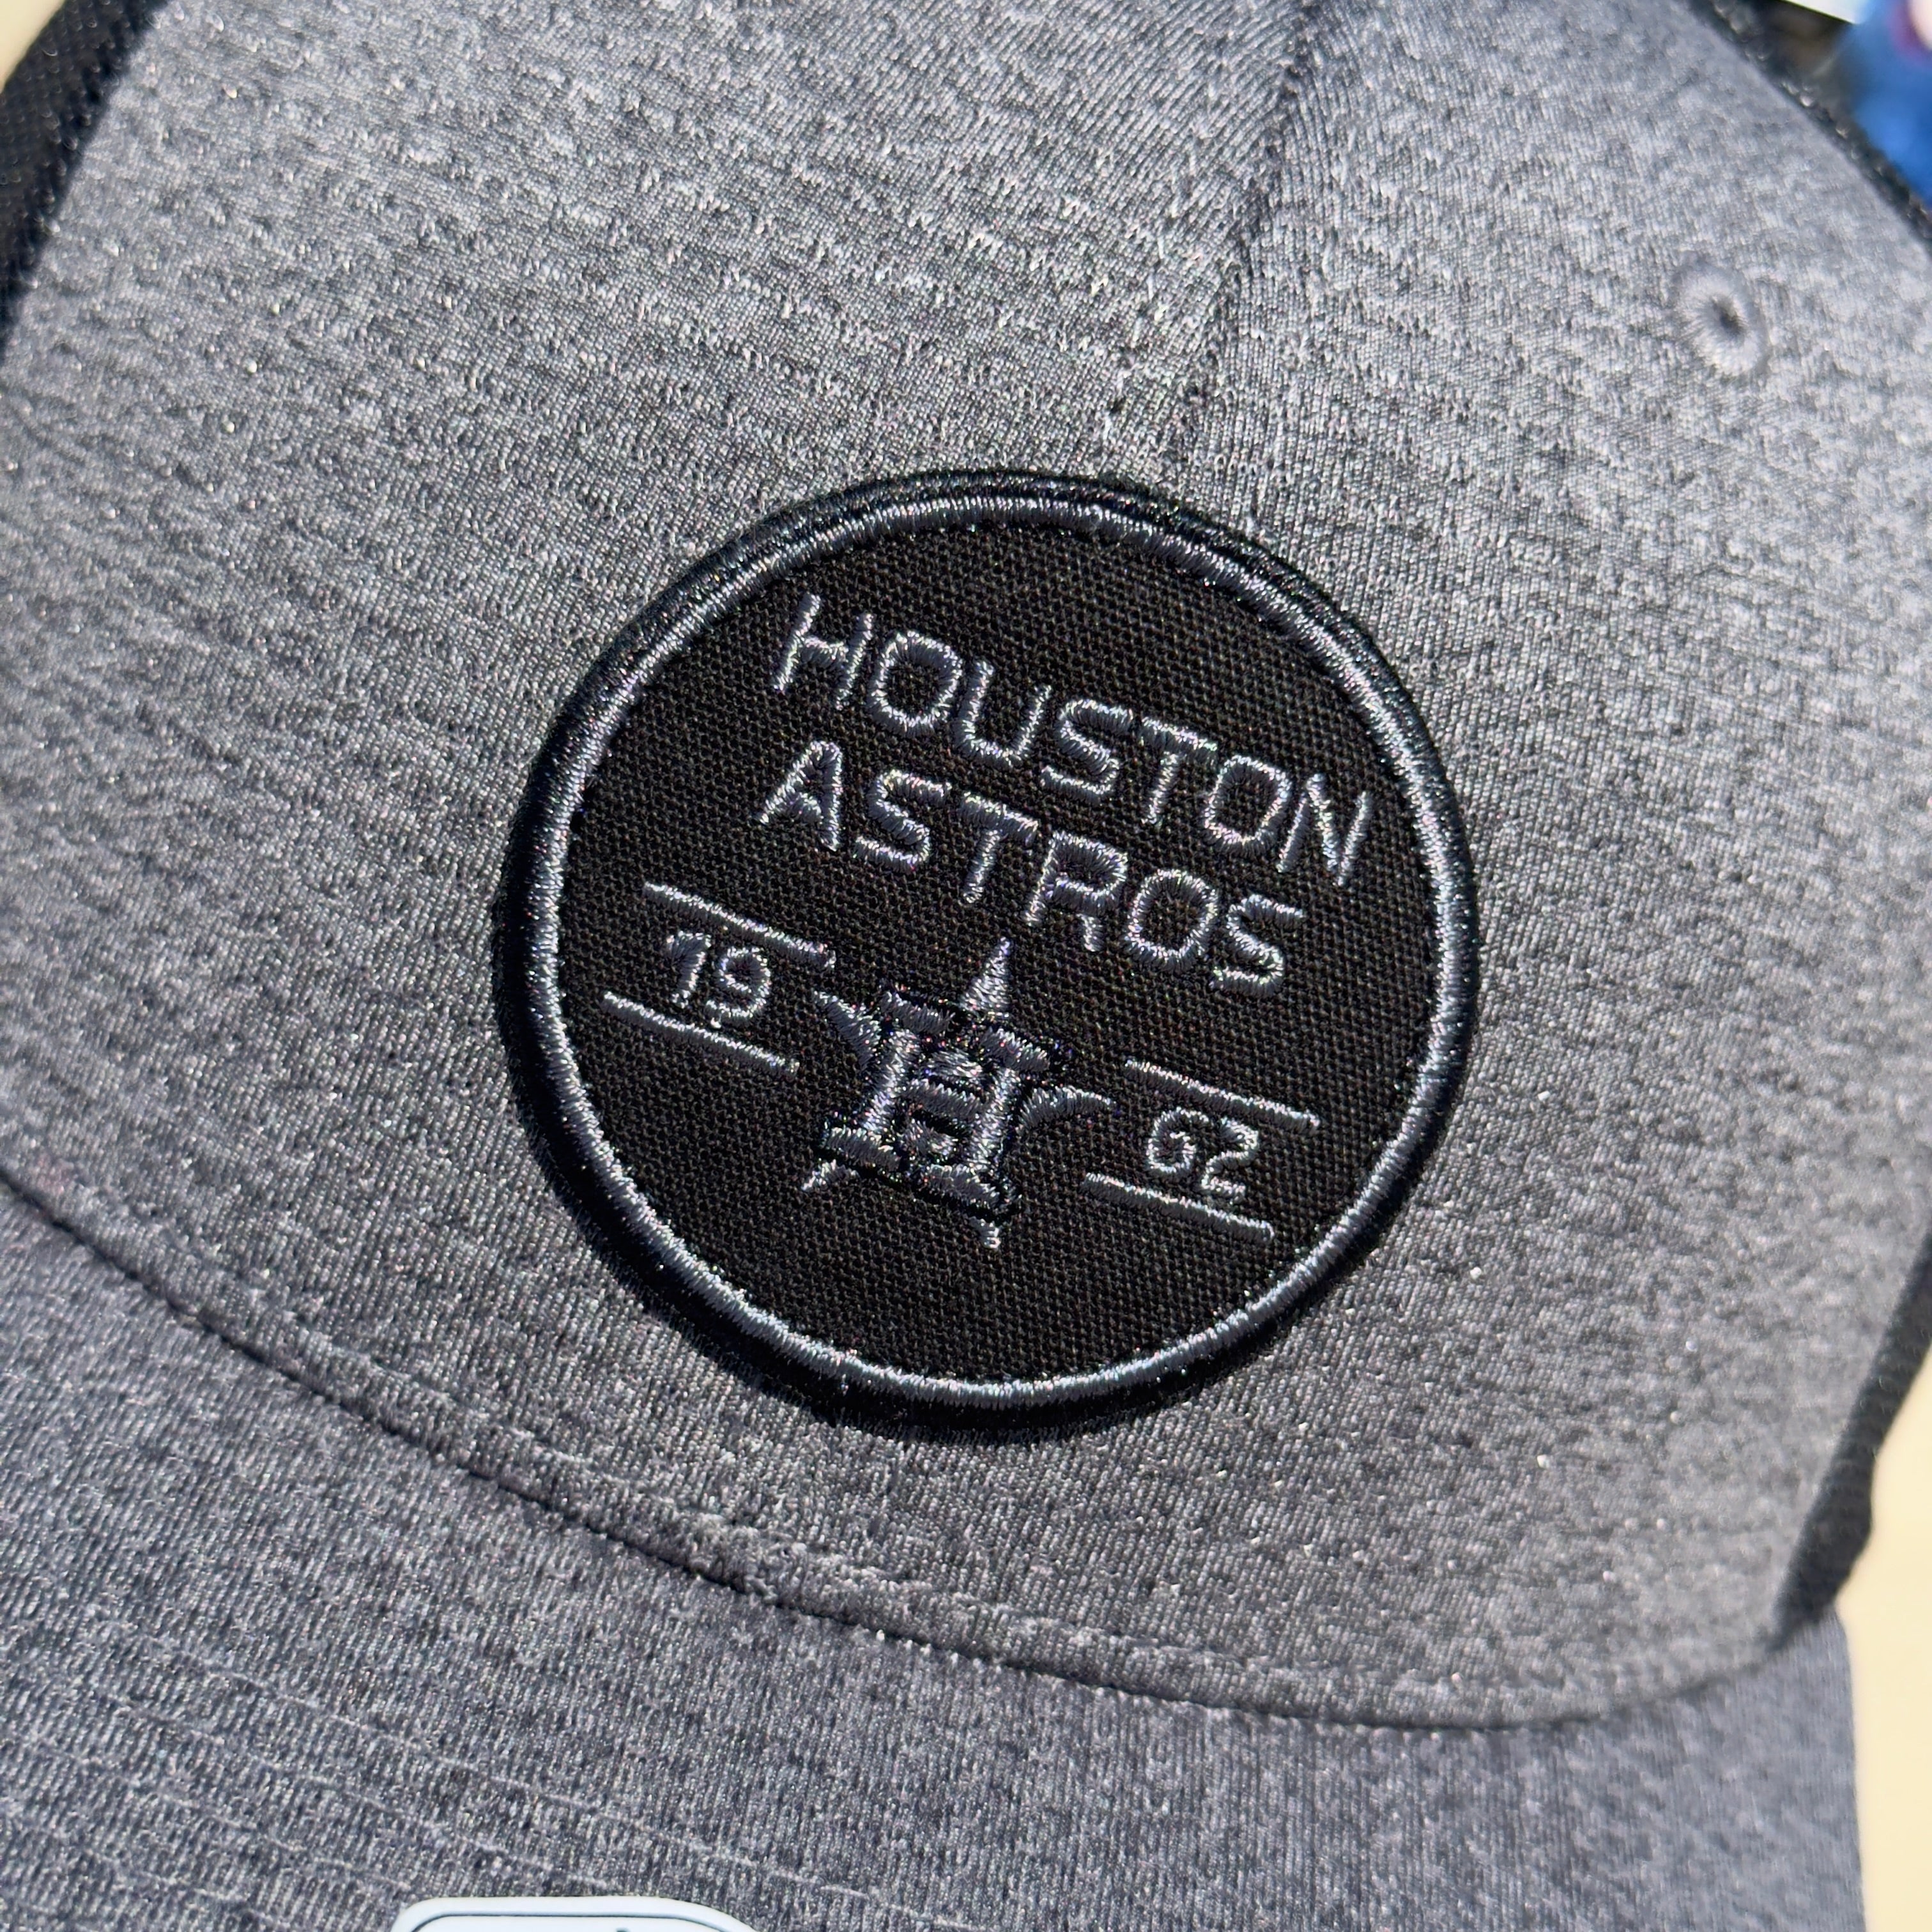 NEW Mesh Trucker Houston Astros MLB Adjustable One Size Fits All Adult Strap Simple